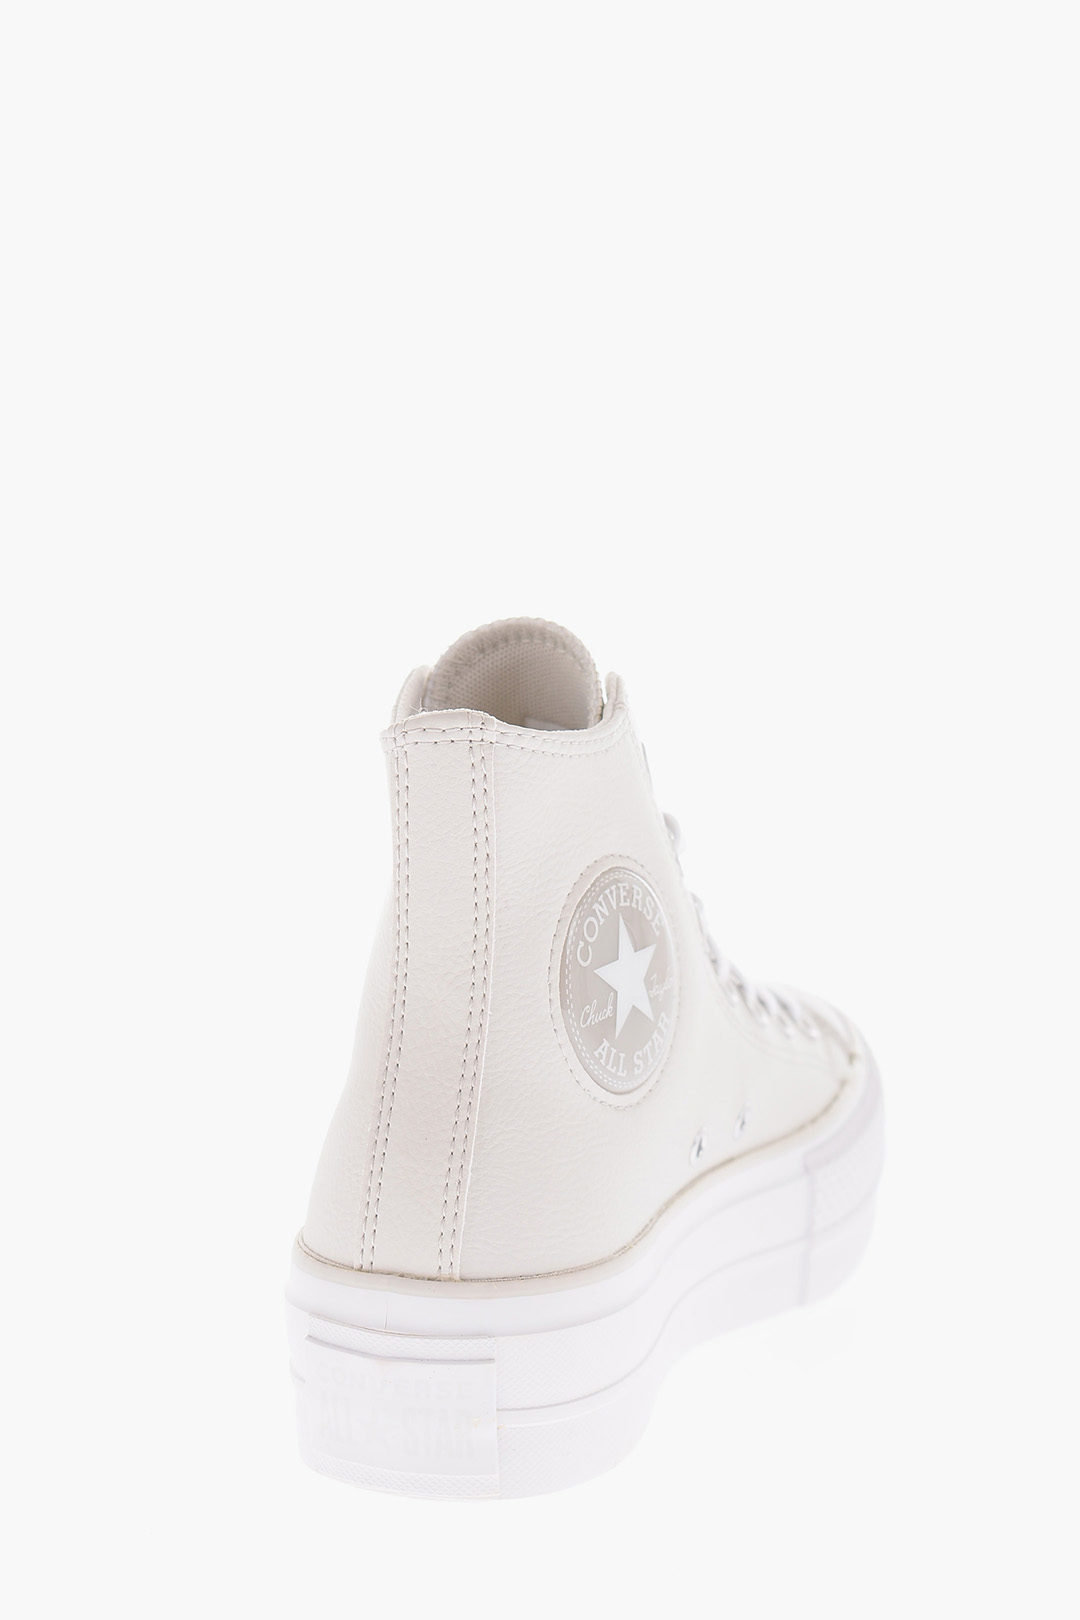 bombilla ilegal máquina de coser Converse CHUCK TAYLOR ALL STAR 4,5cm Faux Leather LIFT High-Top Sneakes  with Platform women - Glamood Outlet